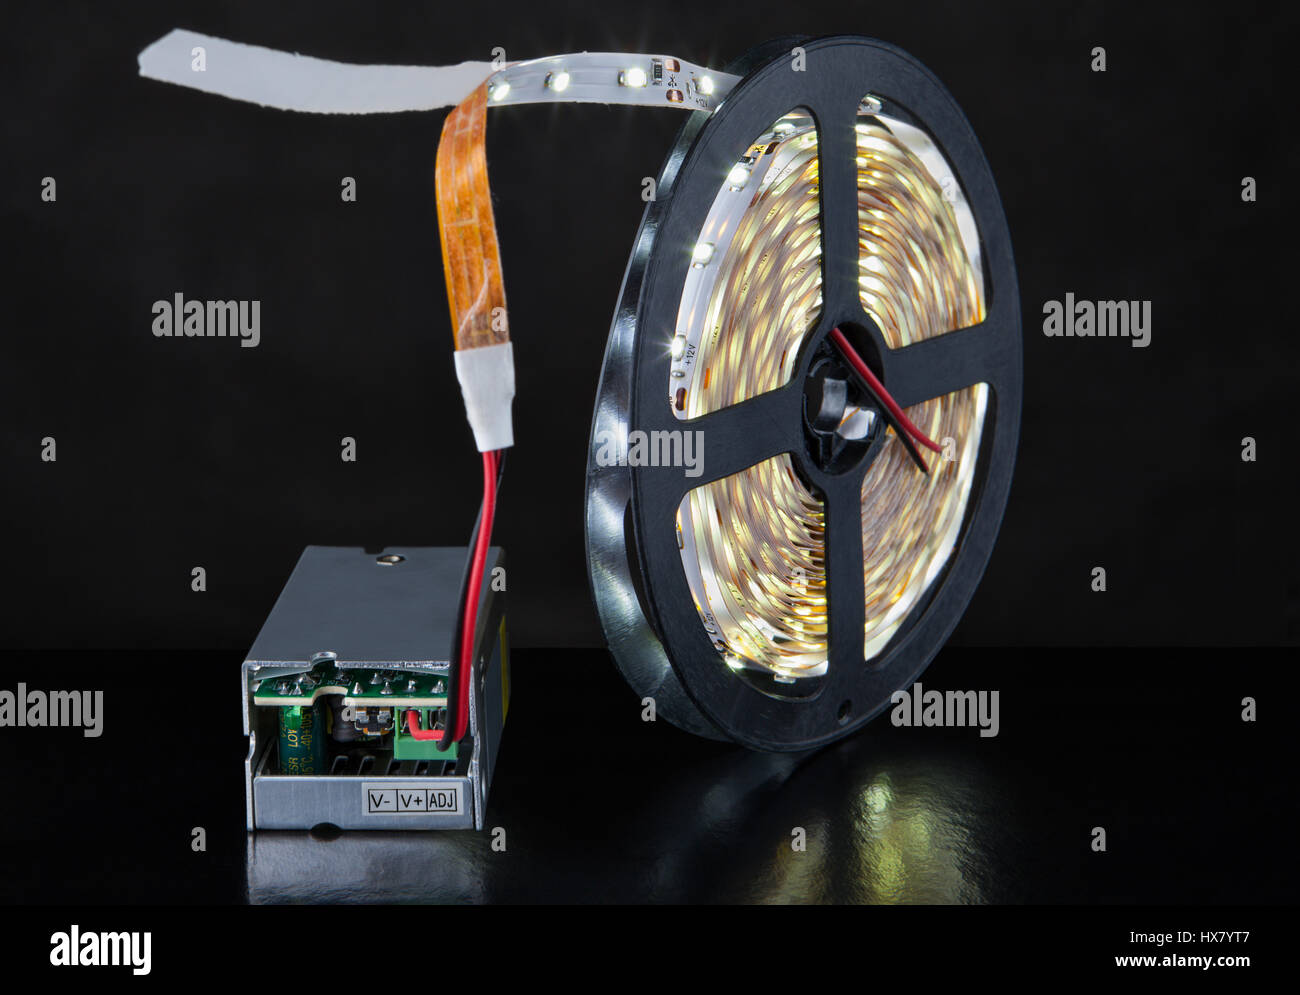 Spool of luminous LED strip light connected to Power Supply Adapter Driver  Stock Photo - Alamy